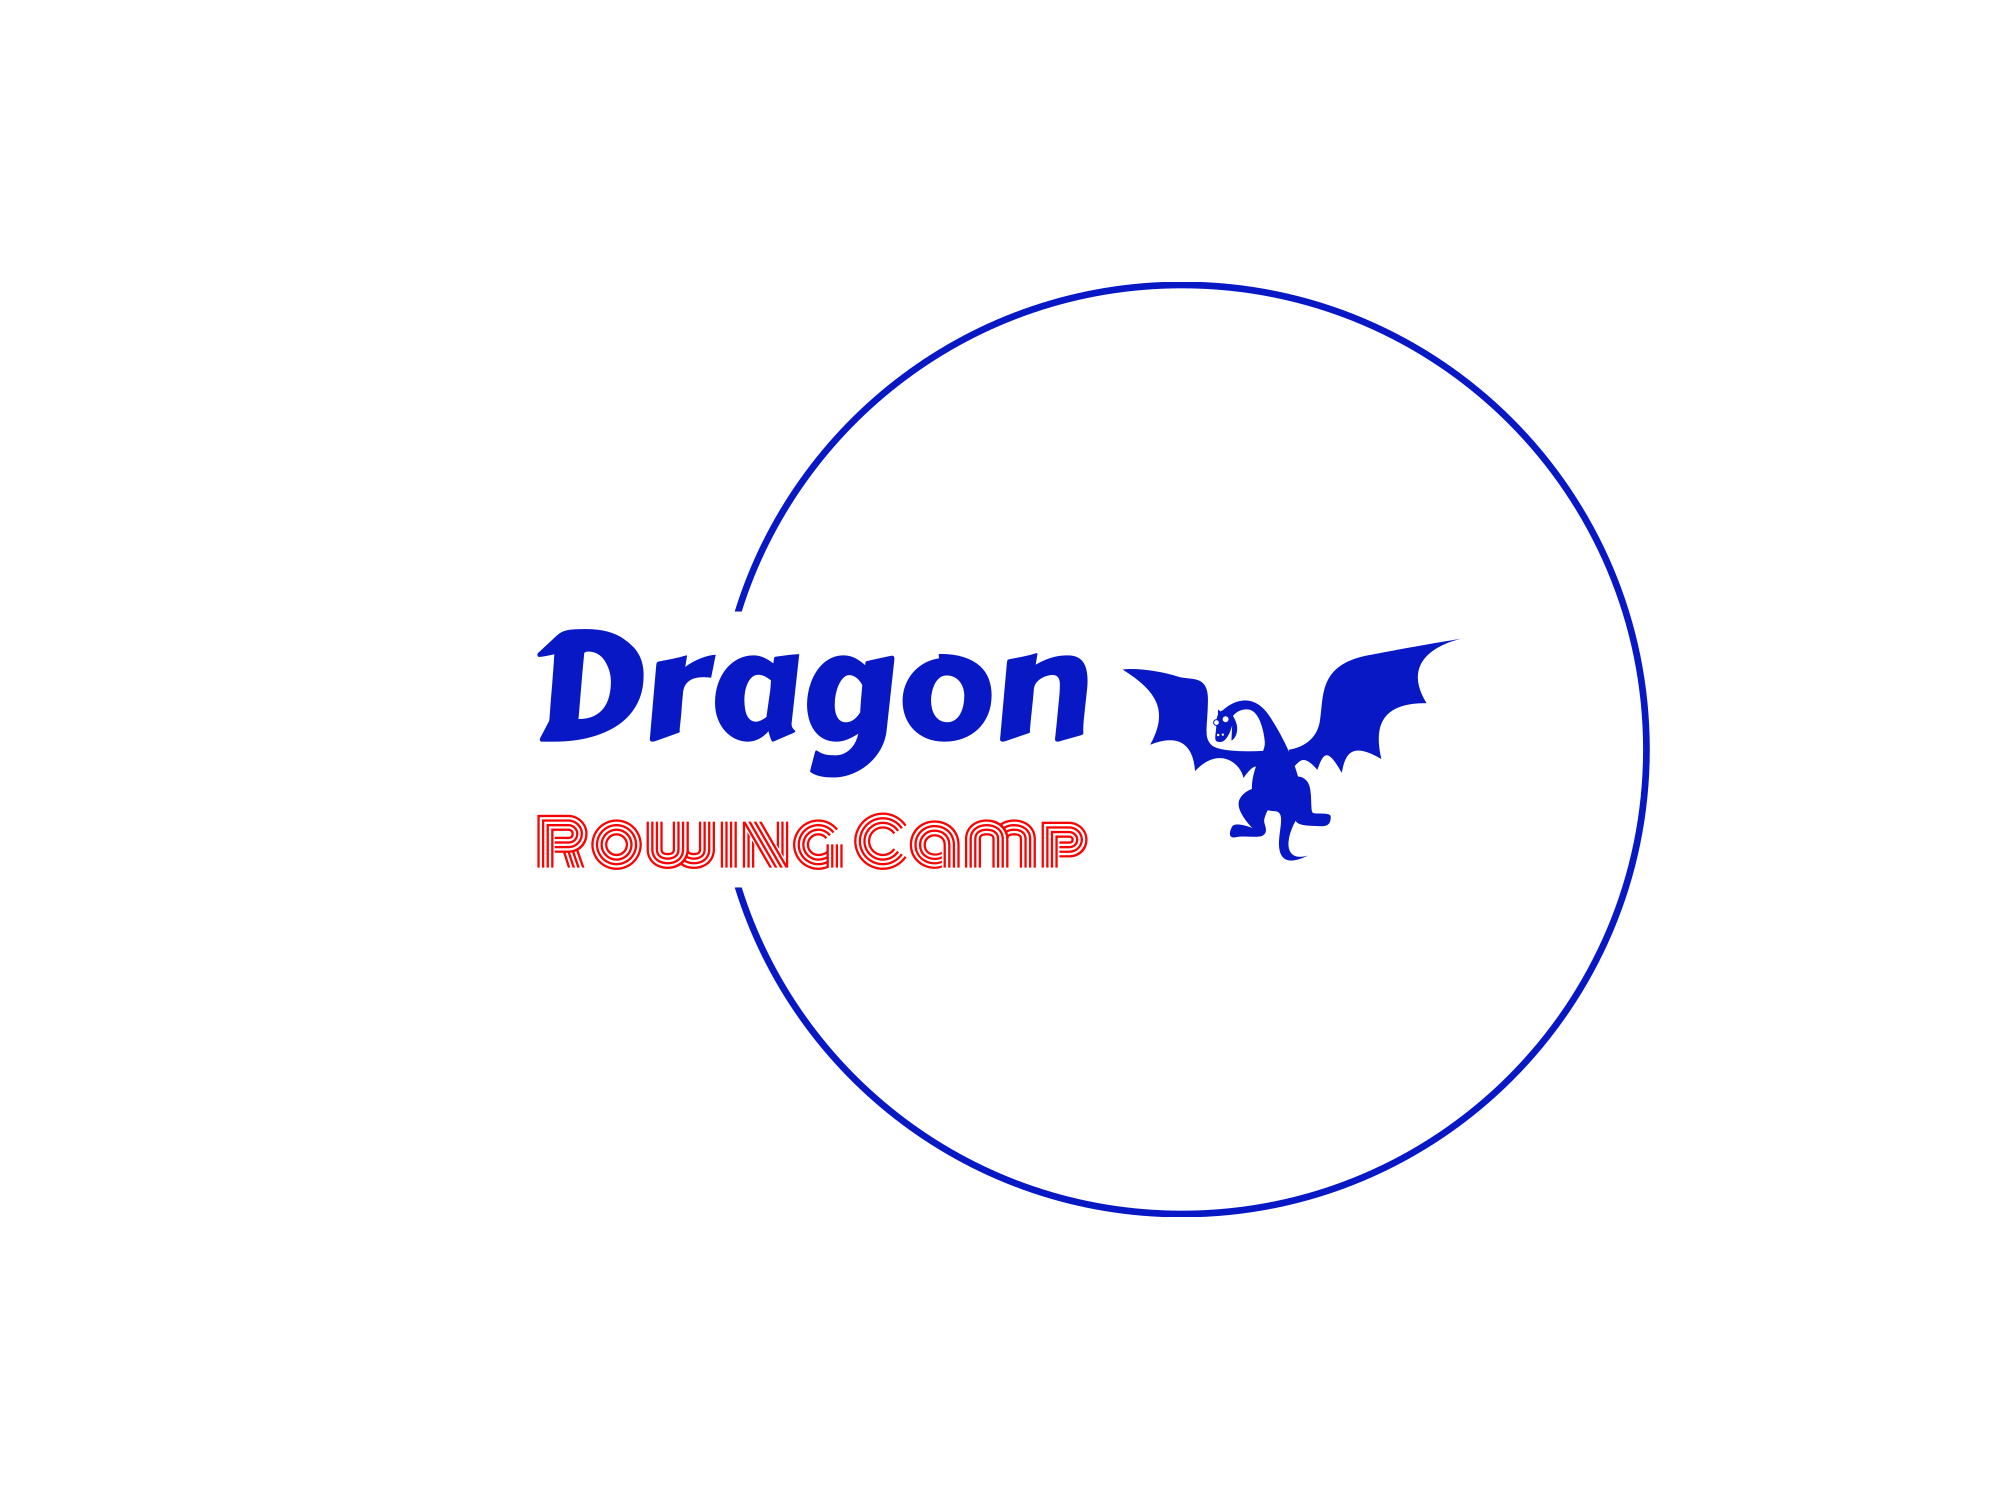 Dragon Rowing Camps